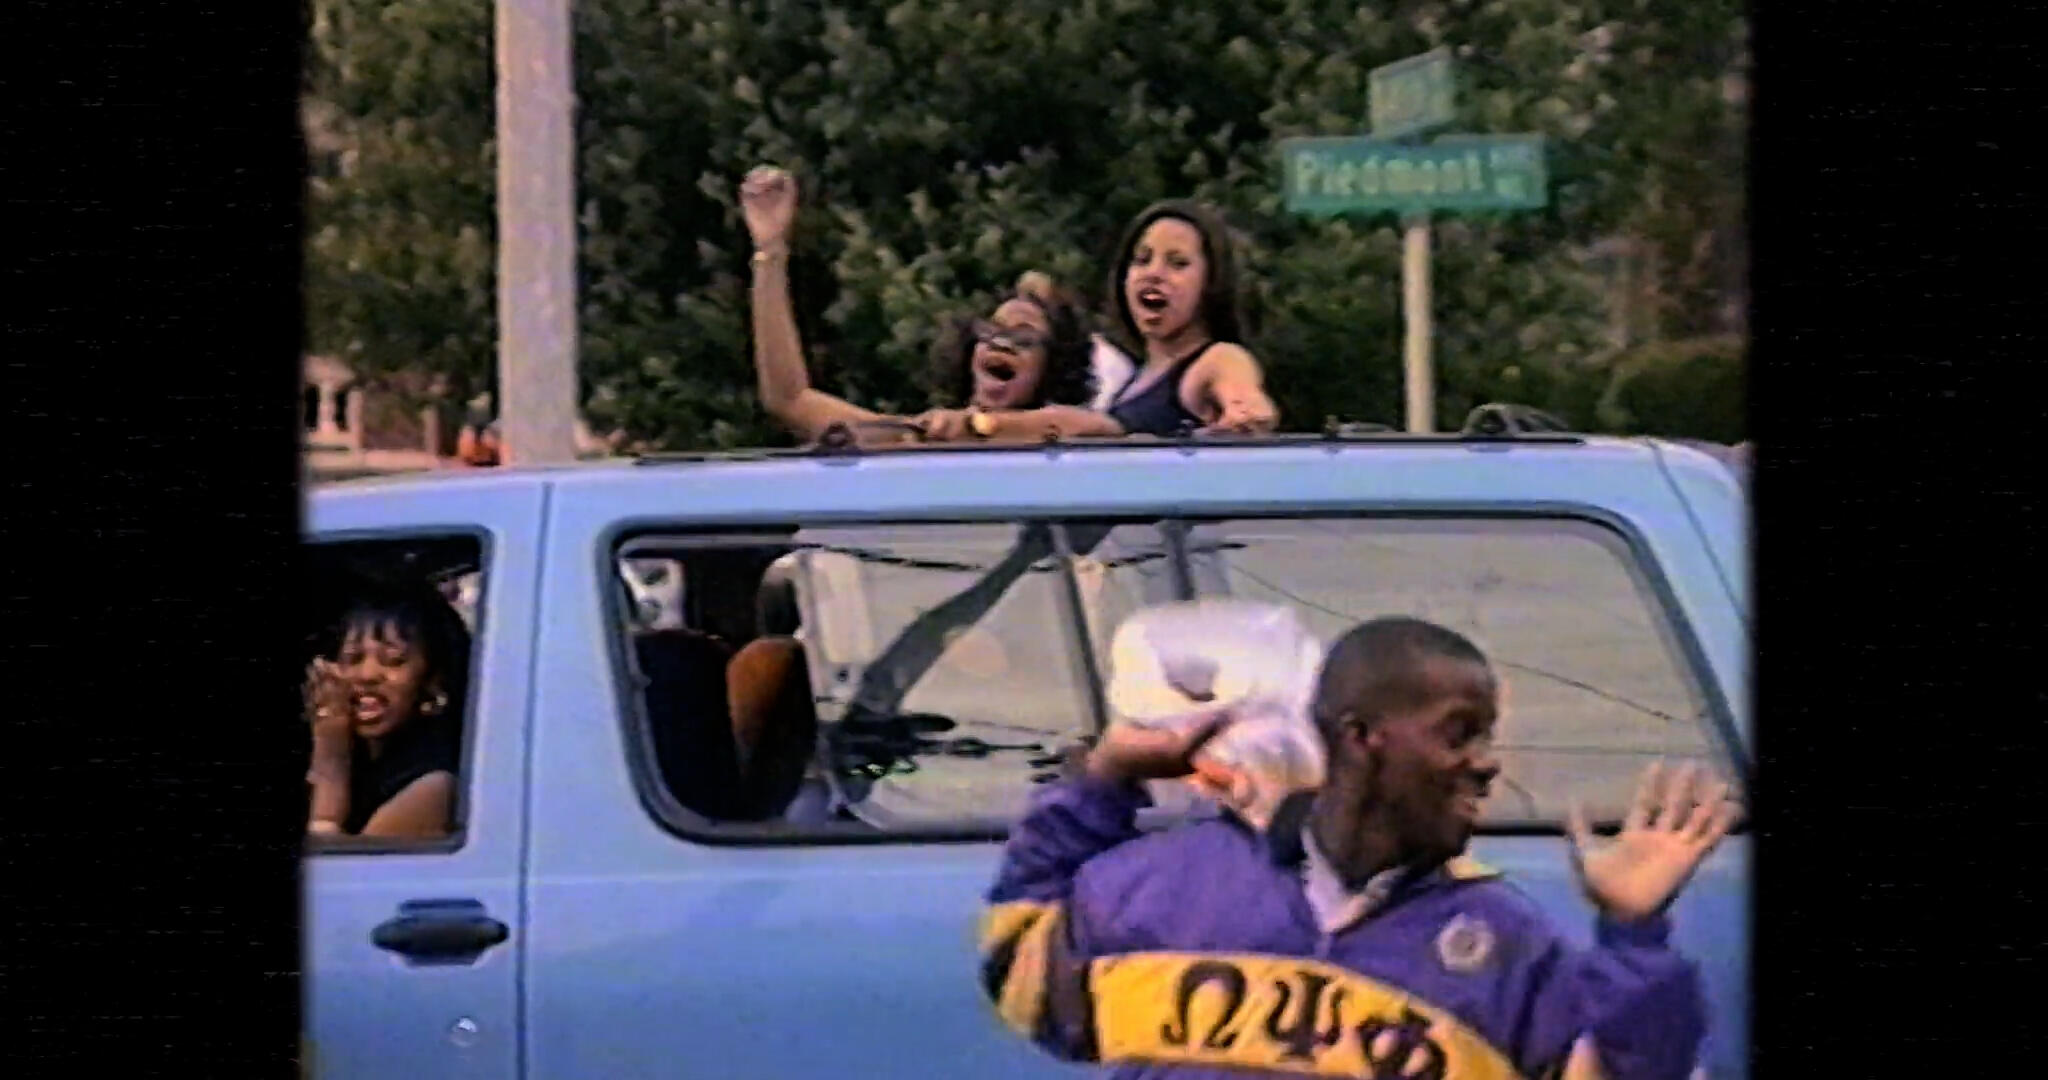 ‘Freaknik: The Wildest Story Never Told’ On Hulu: Jermaine Dupri And Uncle Luke Talk About The Doc And Atlanta History